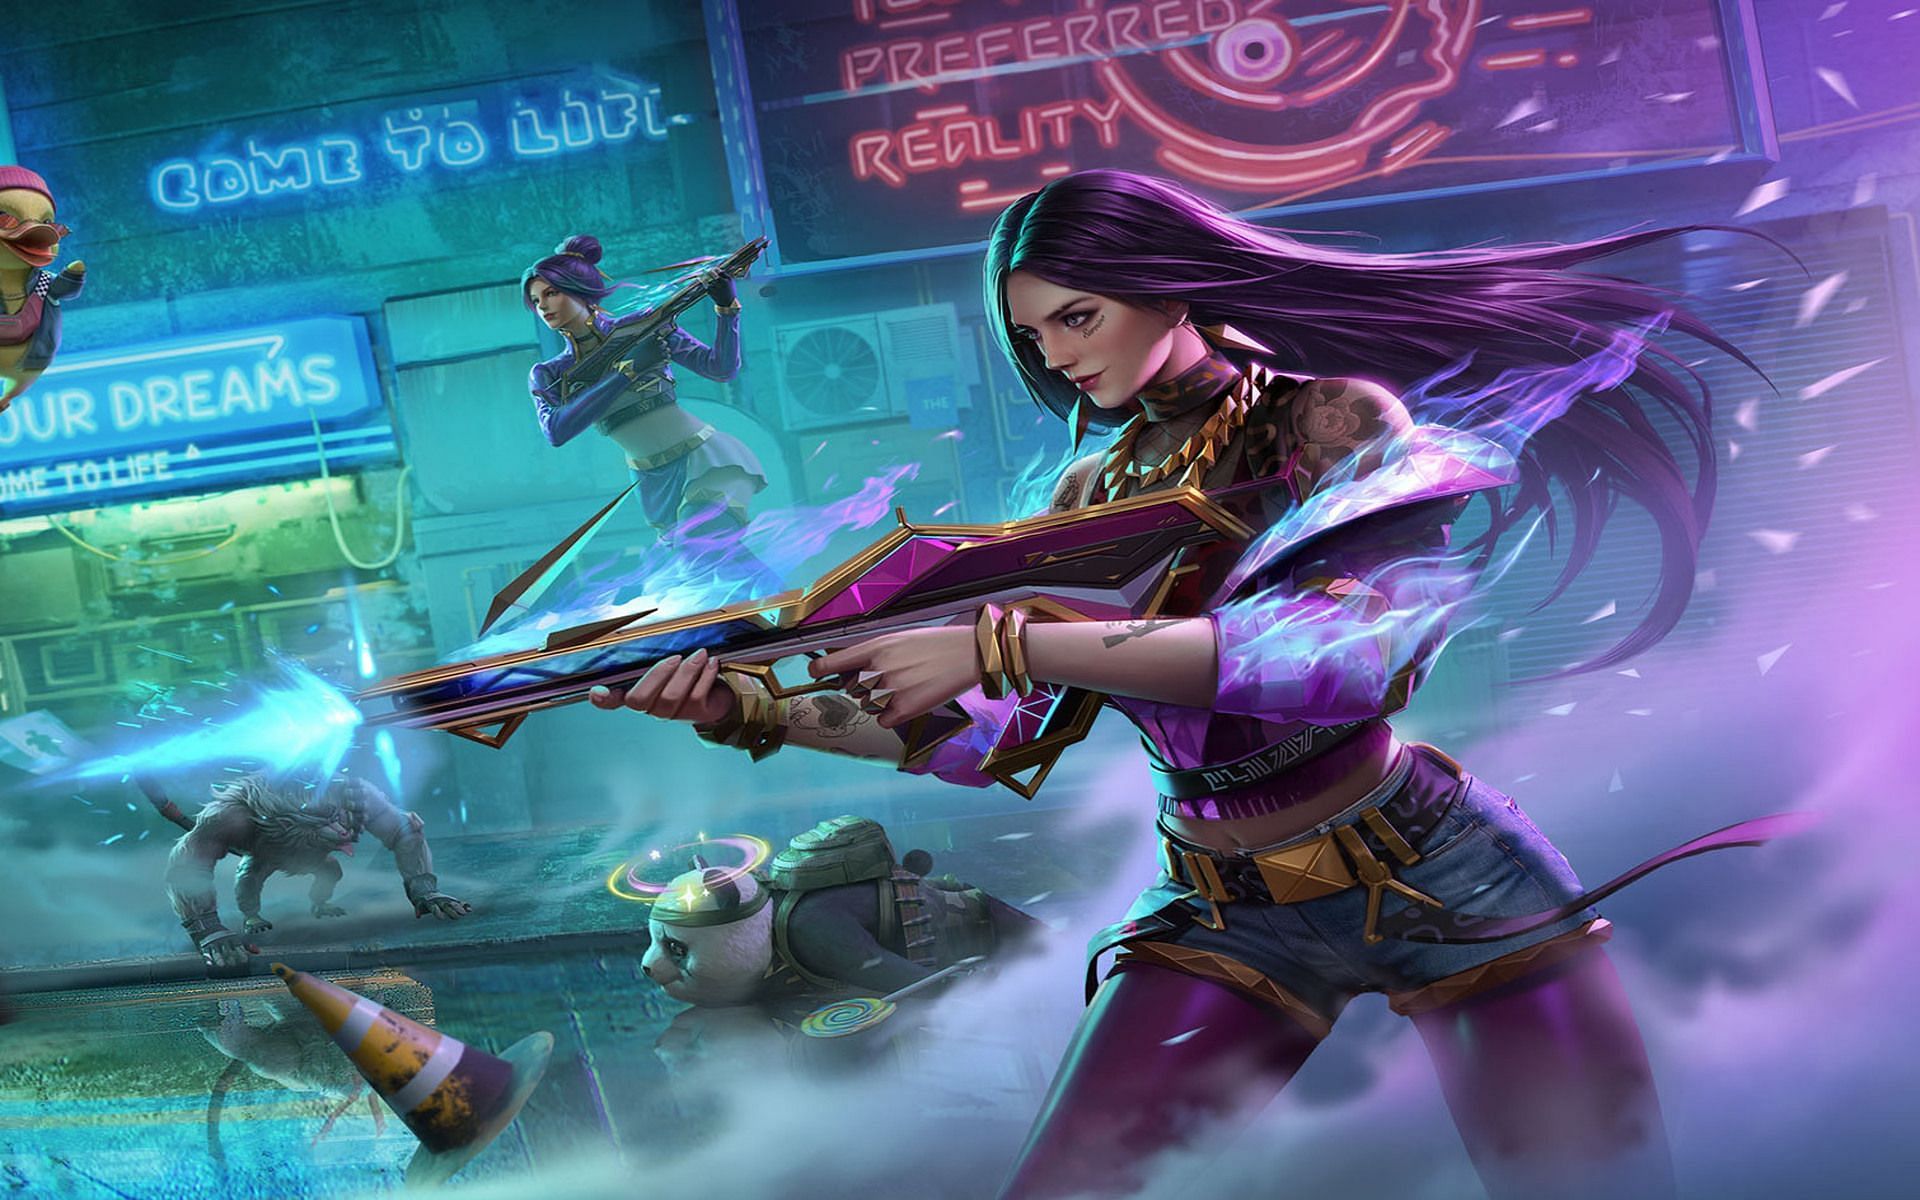 Free Fire Max OB35 Update Releases Today: To Bring Feature Command Wheel,  New Map, Gloo Wall Quick-Cast, and More - MySmartPrice